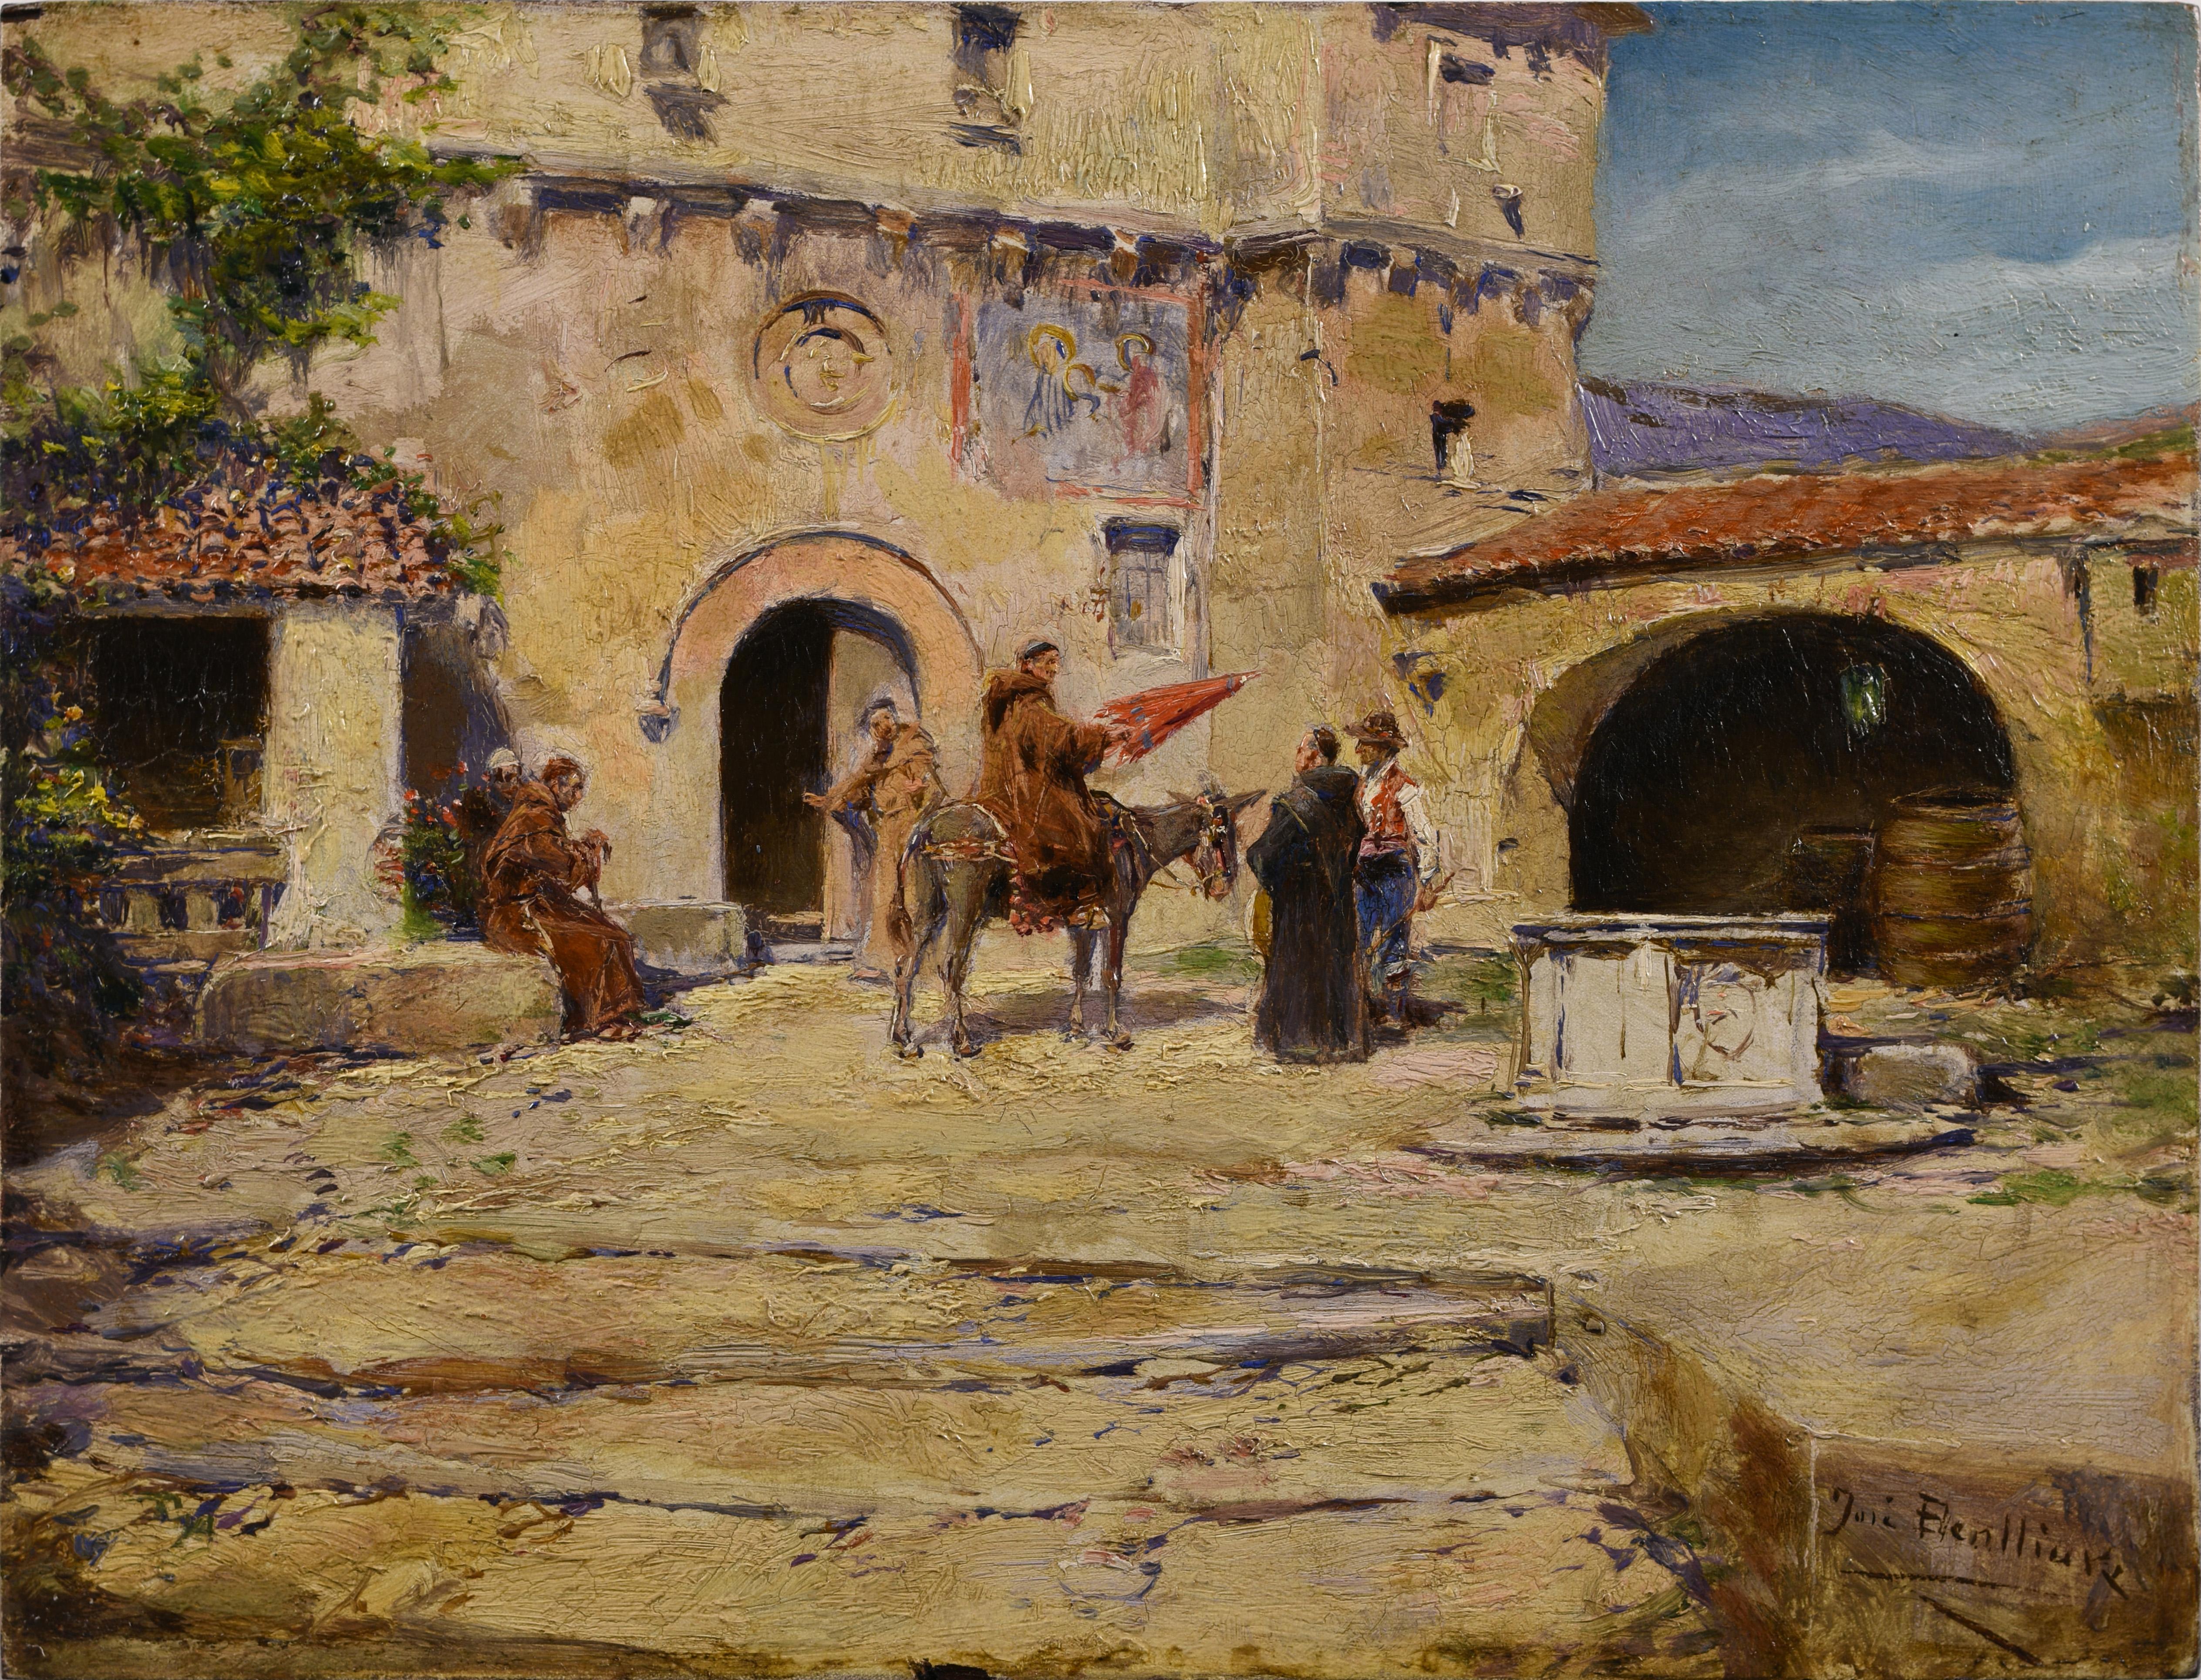 Saying goodbye to the friar in the monastery, Spanish costumbrist scene painting - Painting by José Benlliure